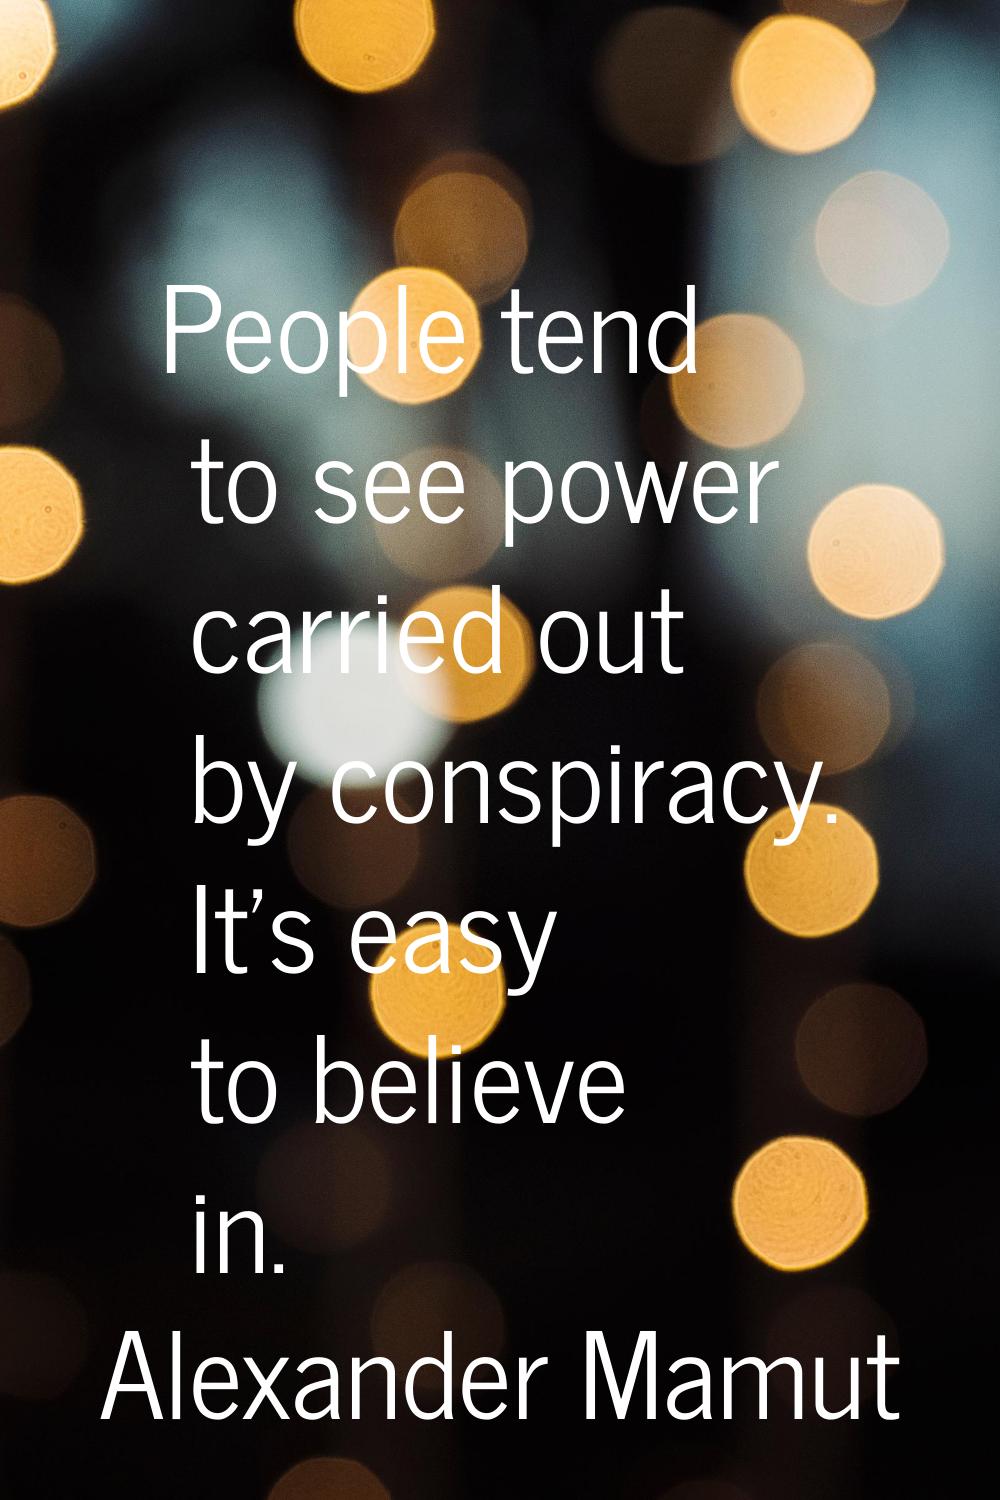 People tend to see power carried out by conspiracy. It's easy to believe in.